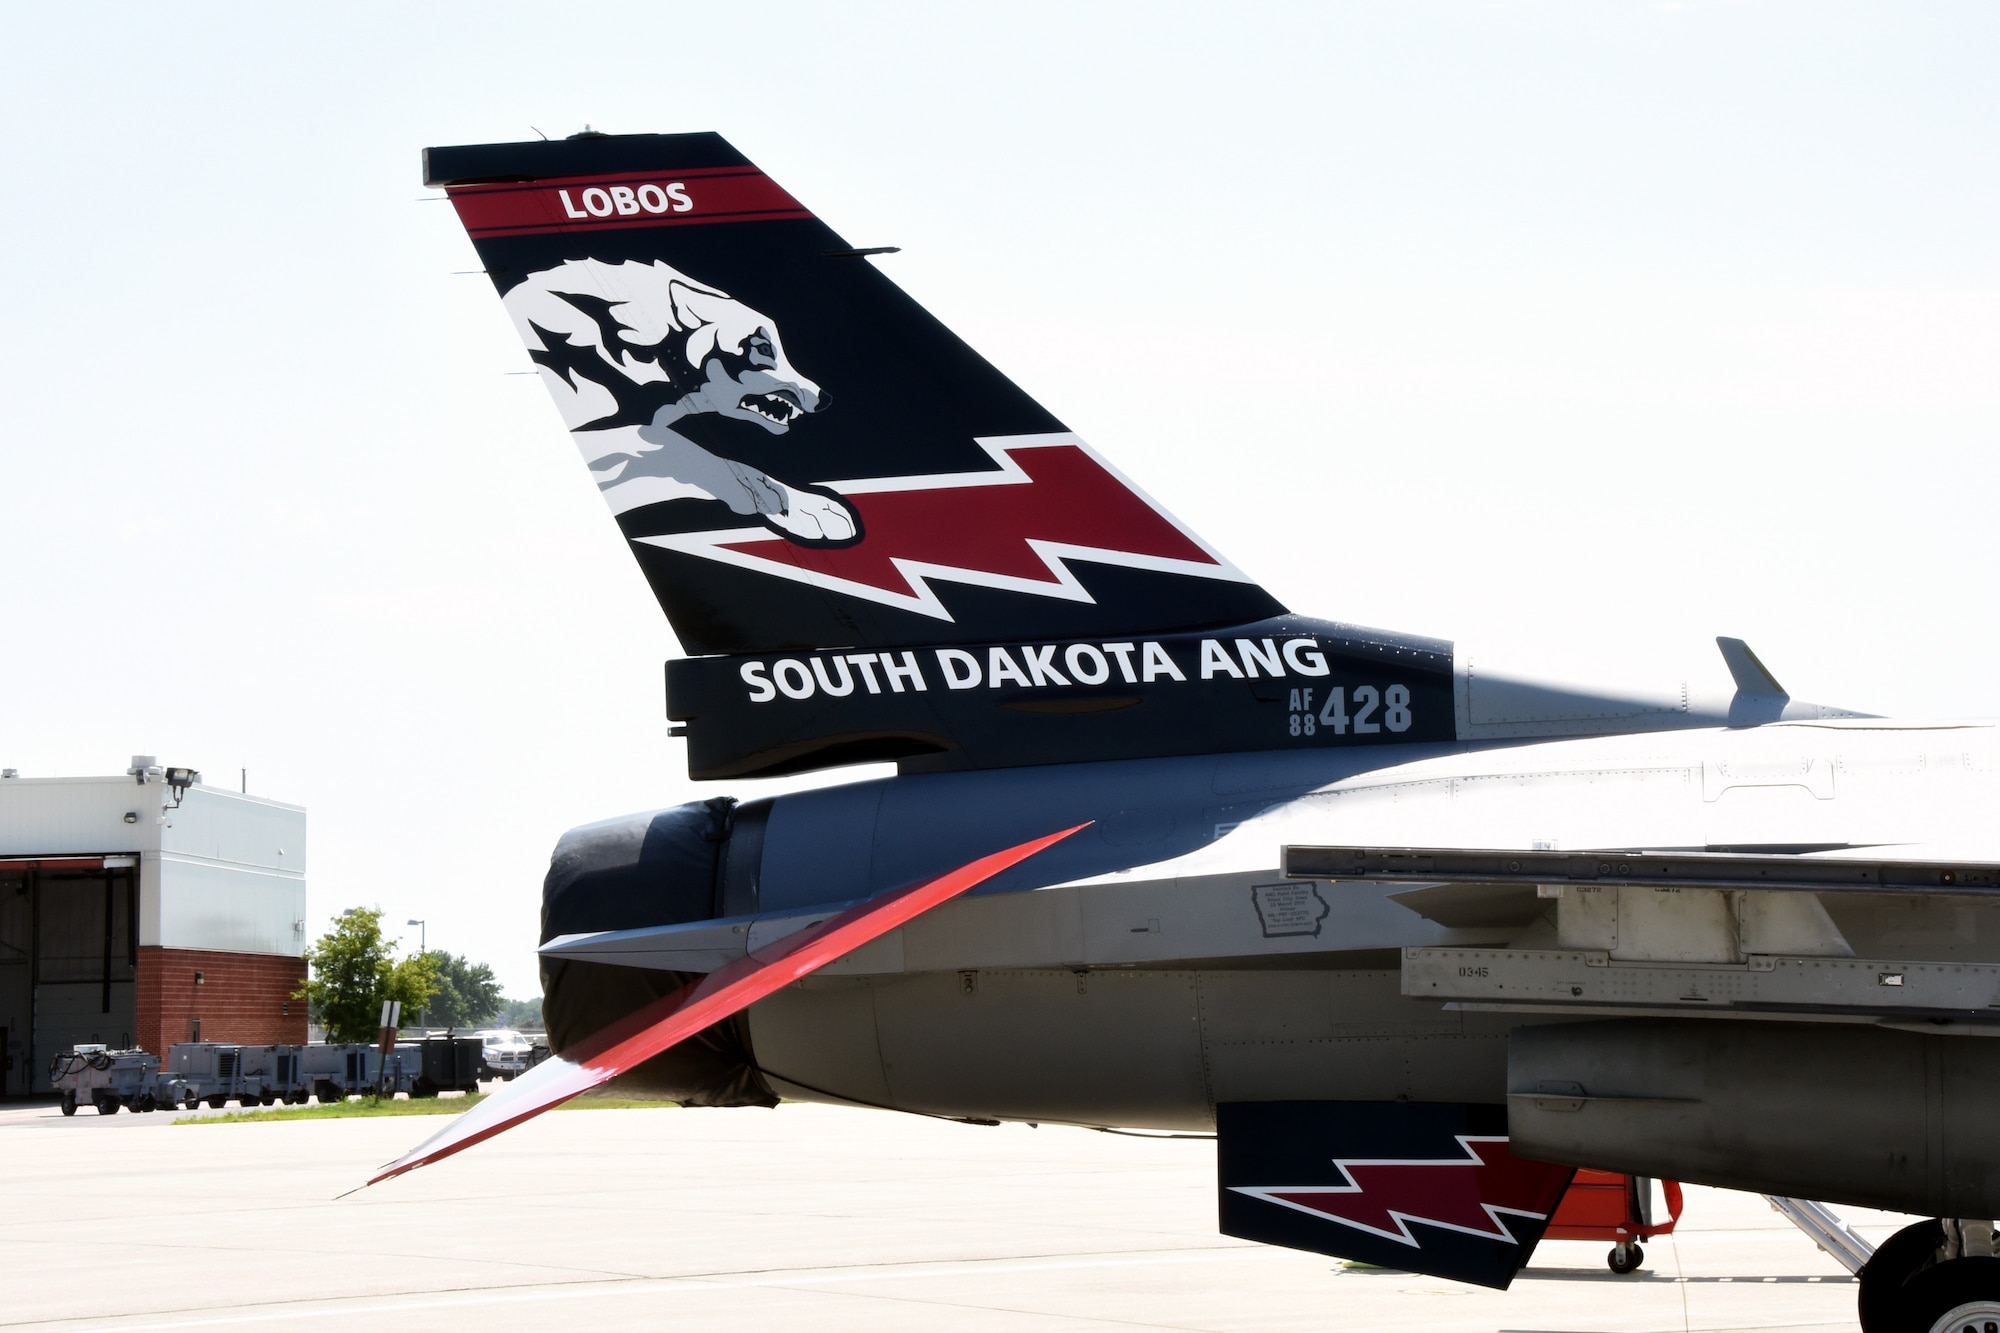 SIOUX FALLS, S.D.- This year marks the 70th anniversary of the South Dakota Air National Guard and the unit will be flying this commemorative aircraft over the next few months to recognize this milestone. This aircraft, along with many more military and civilian aircrafts, will be on static display at the Sioux Falls Airshow at Joe Foss Field, July 23-24, 2016. (U.S. Air National Guard photo by Senior Master Sgt. Nancy Ausland/Released)